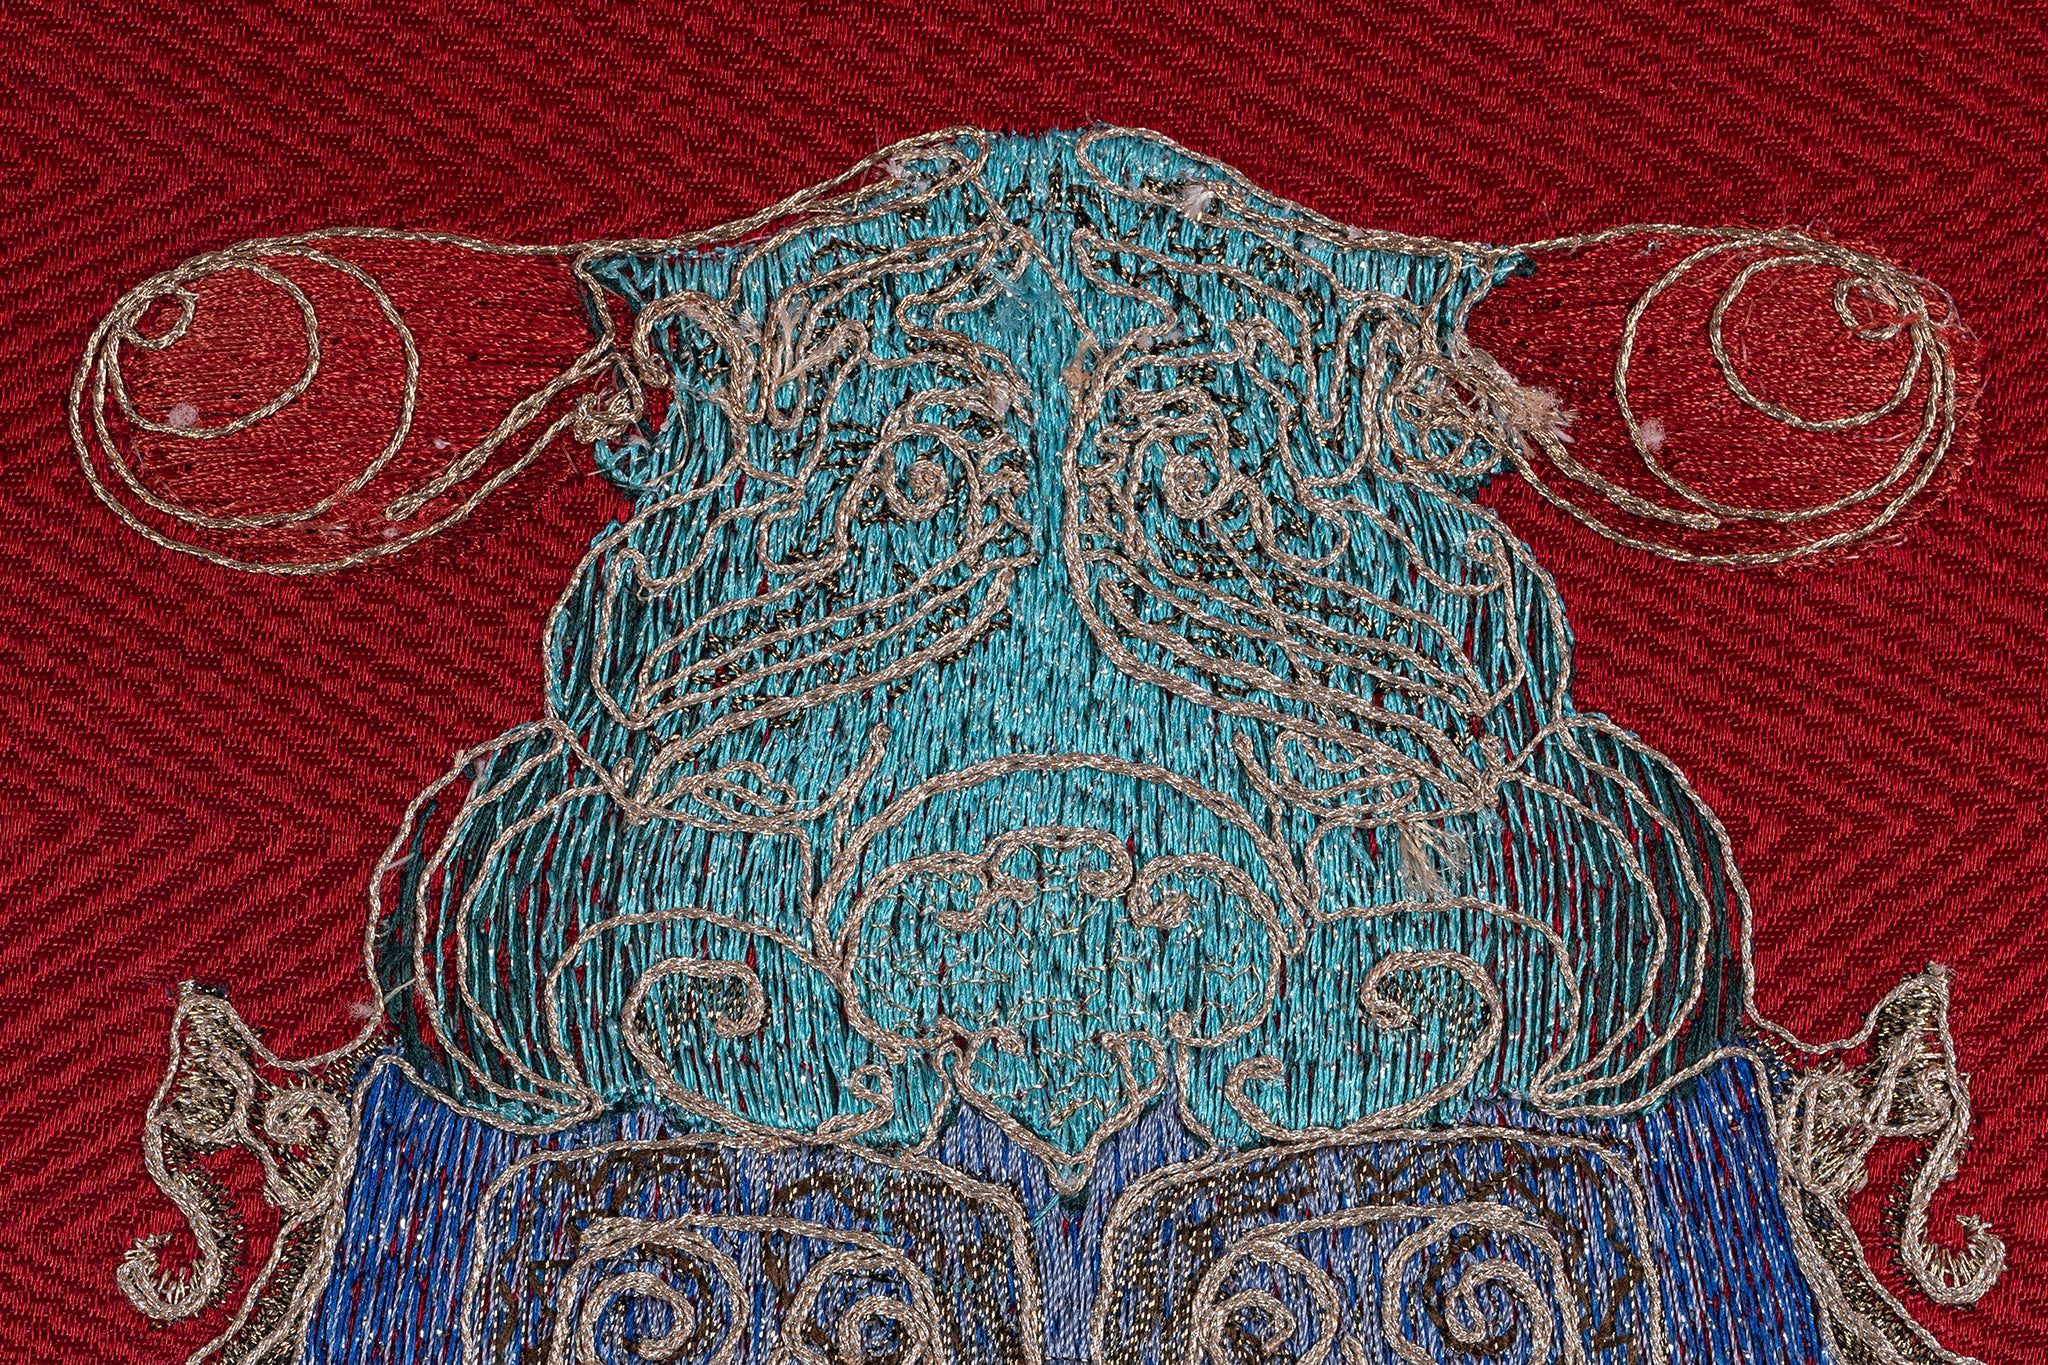 Close-up of the head details of a framed embroidery artwork featuring a cicada design.  The embroidery highlights detailed patterns in blue and white thread on a red background.